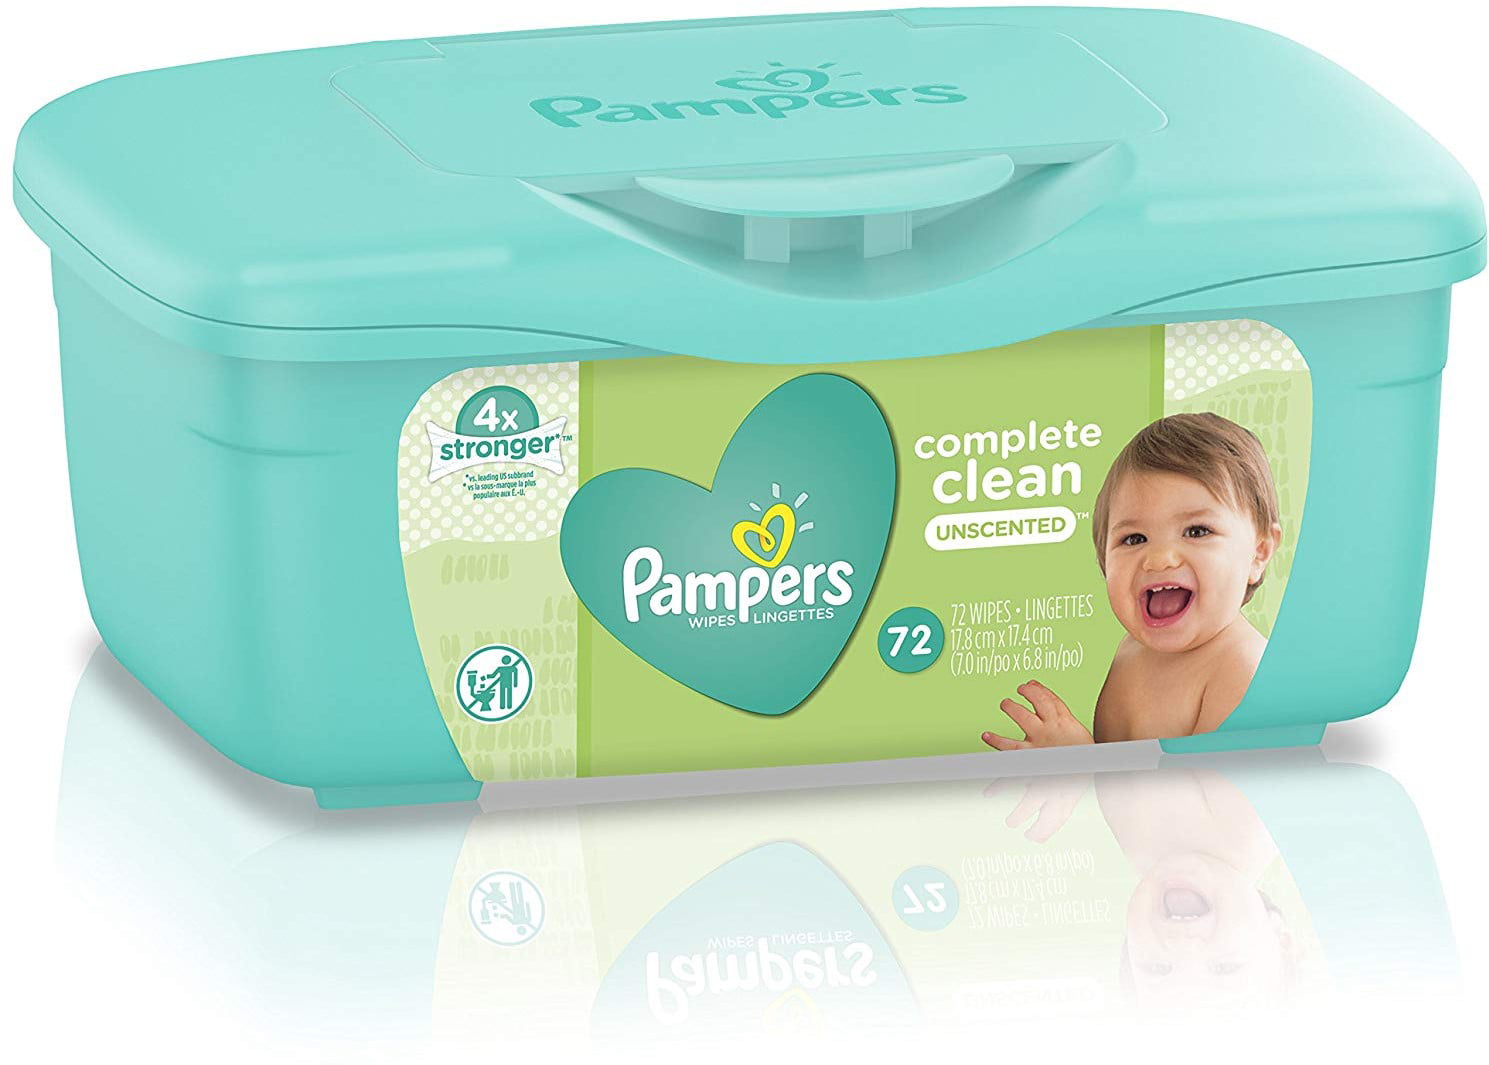 4-pack-pampers-baby-wipes-complete-clean-unscented-72-ea-walmart